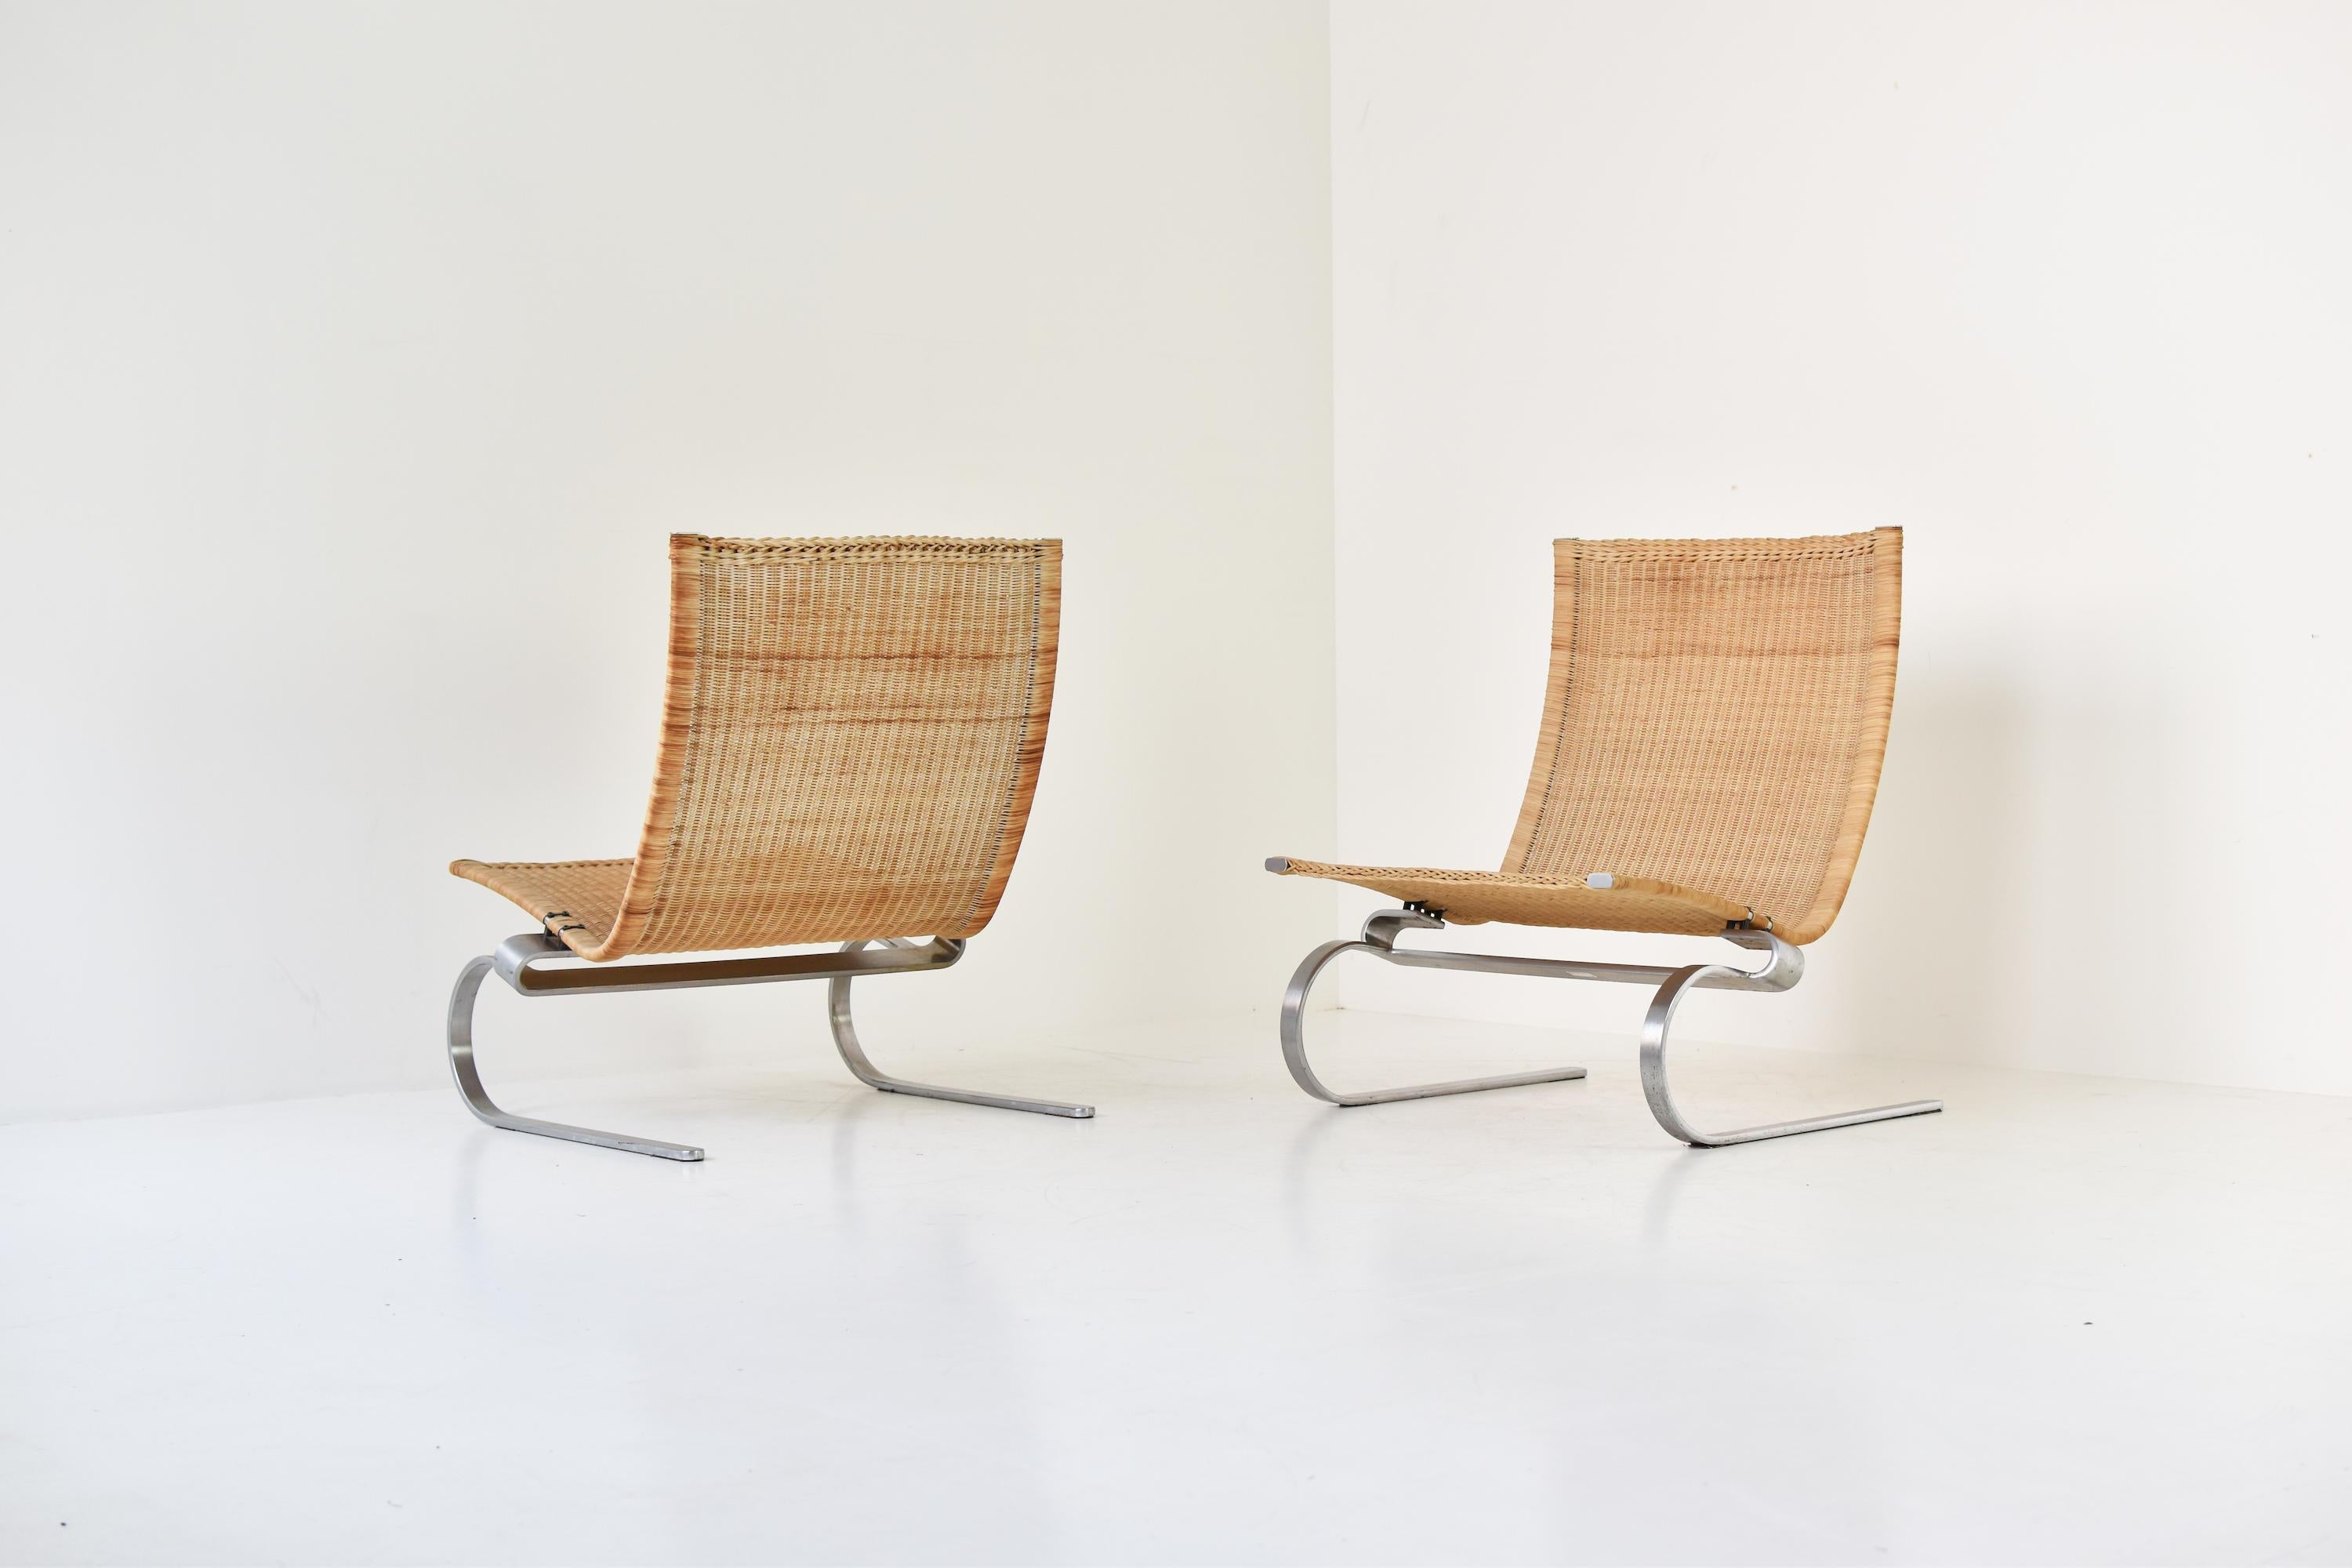 Set of two ‘PK20’ easy chairs designed by Poul Kjaerholm for Fritz Hansen, Denmark 1994. These easy chairs features a hand-woven rattan seat and a matte chromed flat steel base. Very good condition with some minor wear. Labeled underneath with the